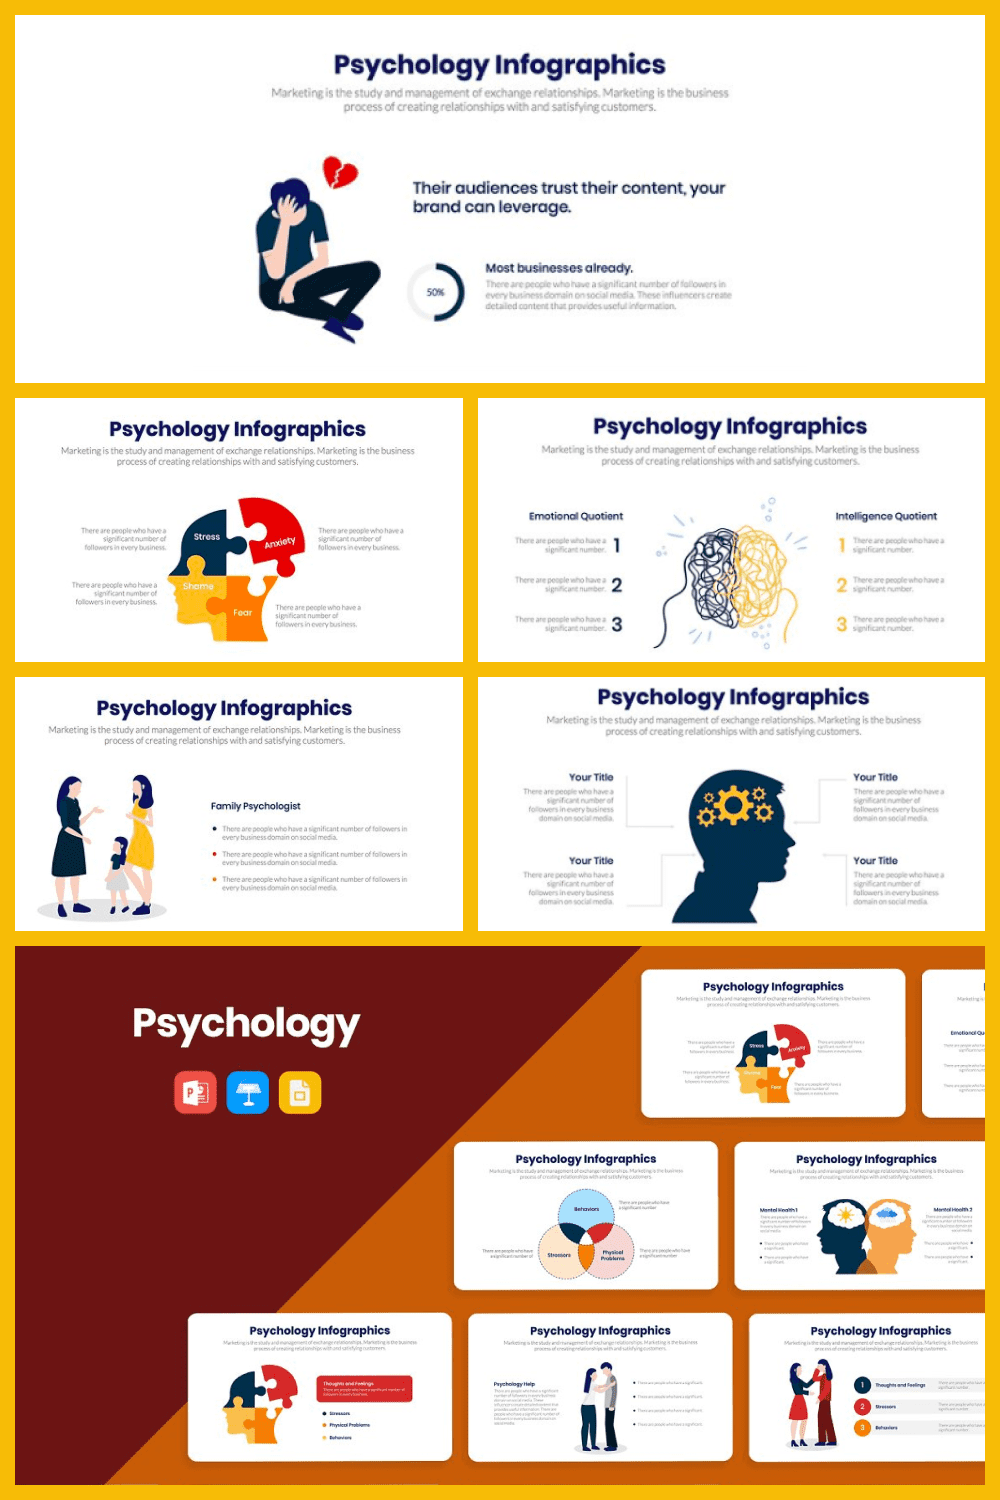 Psychology infographics powerpoint template.